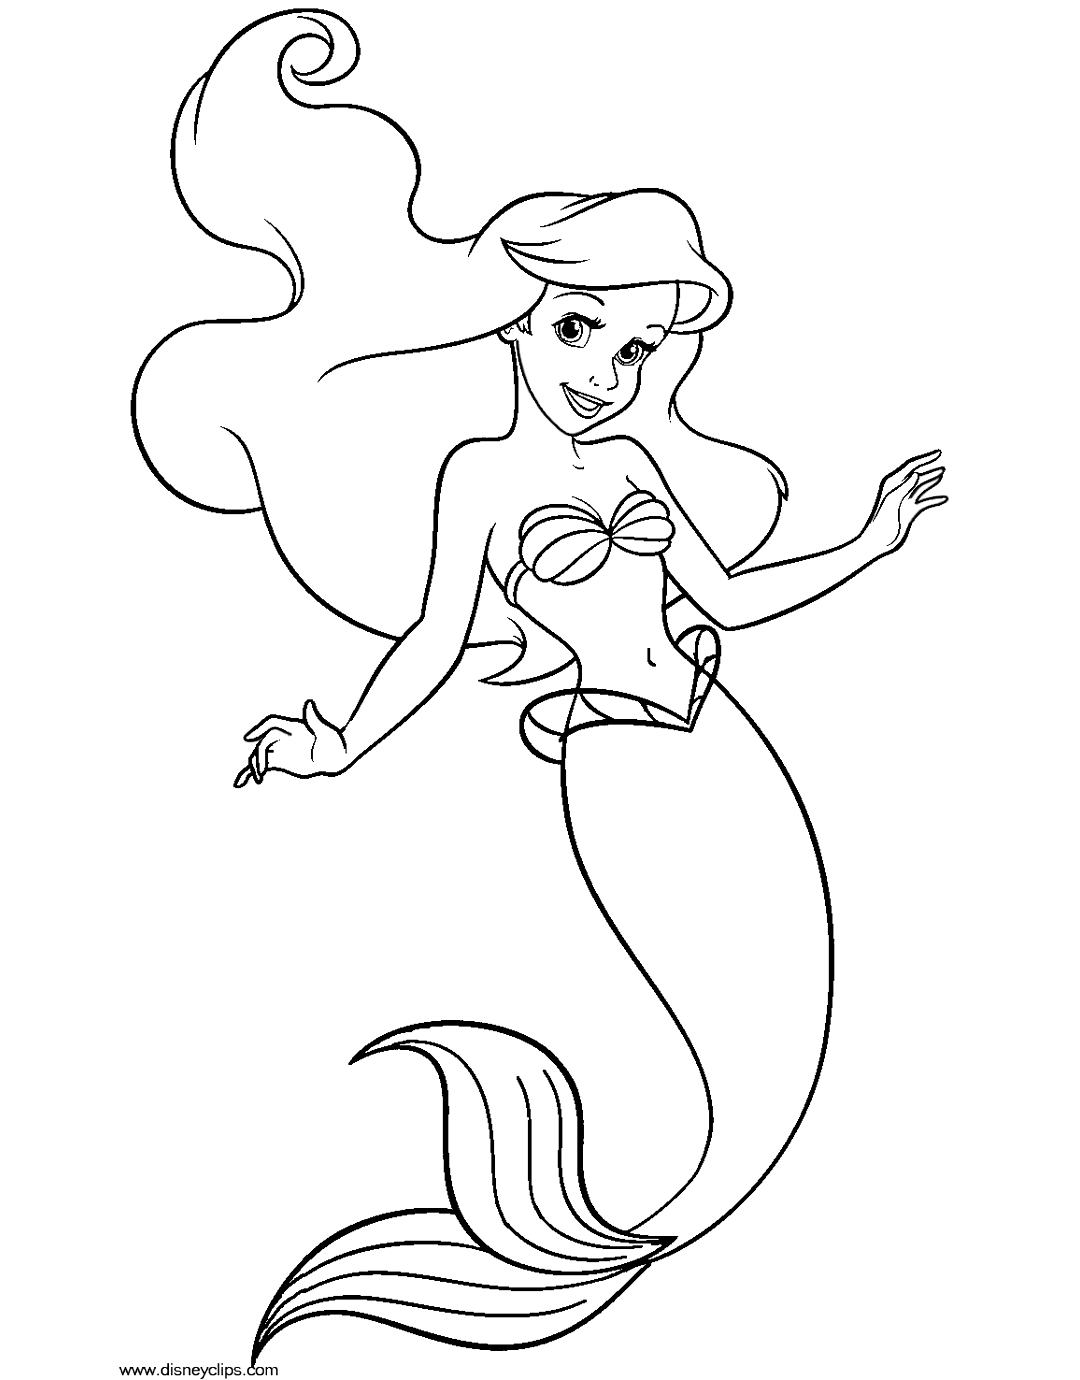 Goodly Princess Ariel Coloring Pages